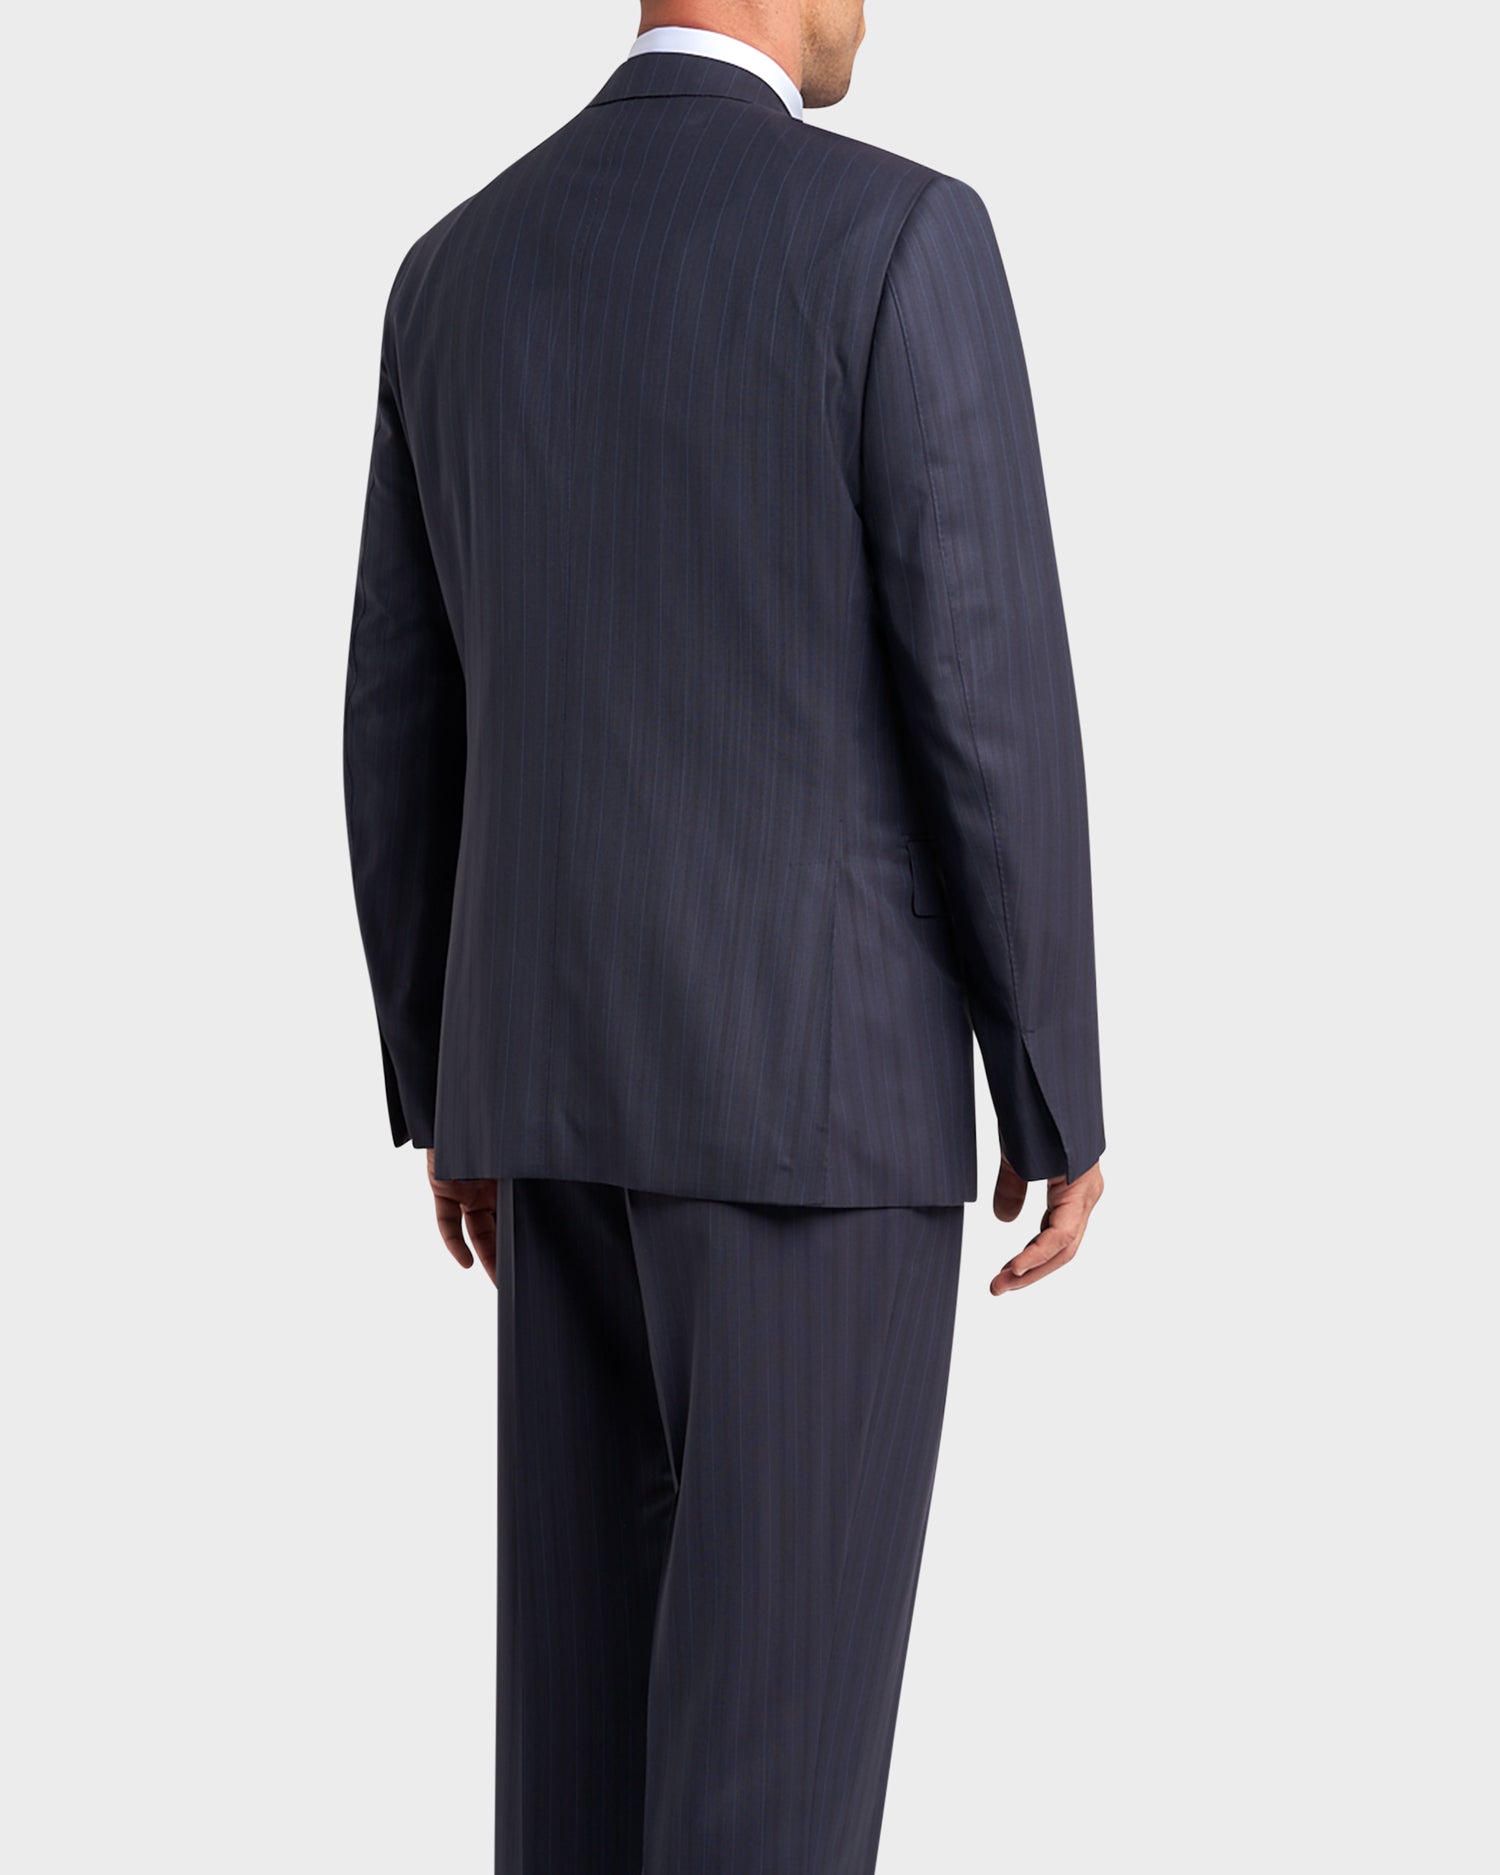 Navy Pinstripe Centoventimila Couture Suit